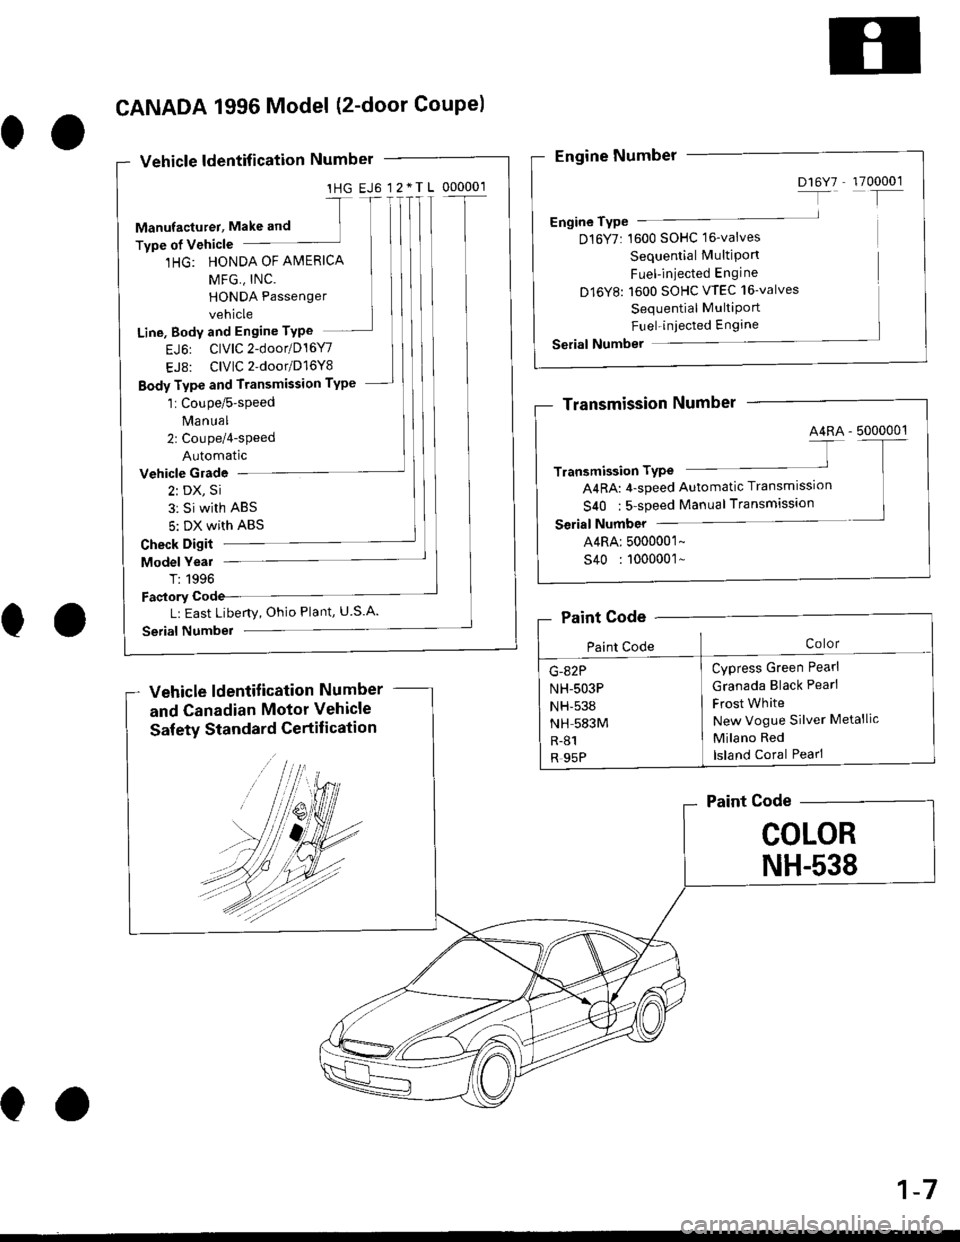 HONDA CIVIC 1999 6.G Workshop Manual 1HG EJ6 12.TL 000001
Line, Body and Engine TYPe
EJ6: ClVlC2-door/D16Y7
EJ8: ClVlC2door/D16Y8
Body Type and Transmission TYPe
Vehicle Glade
2: DX, Si
3: Si with ABS
5: DX with ABS
Check Digit
Model Ye